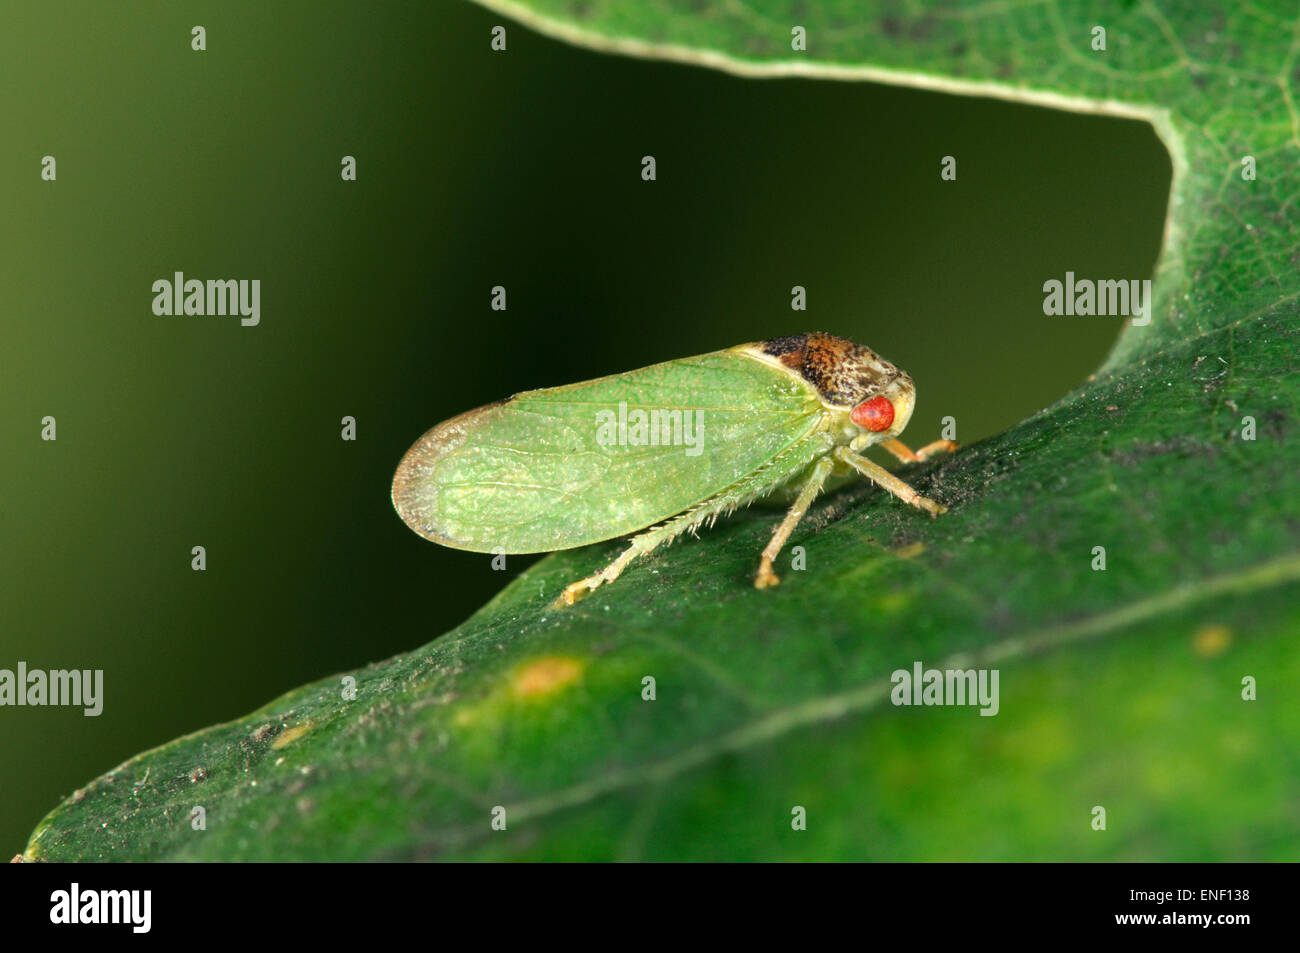 Lanio High Stock Photography and Images - Alamy